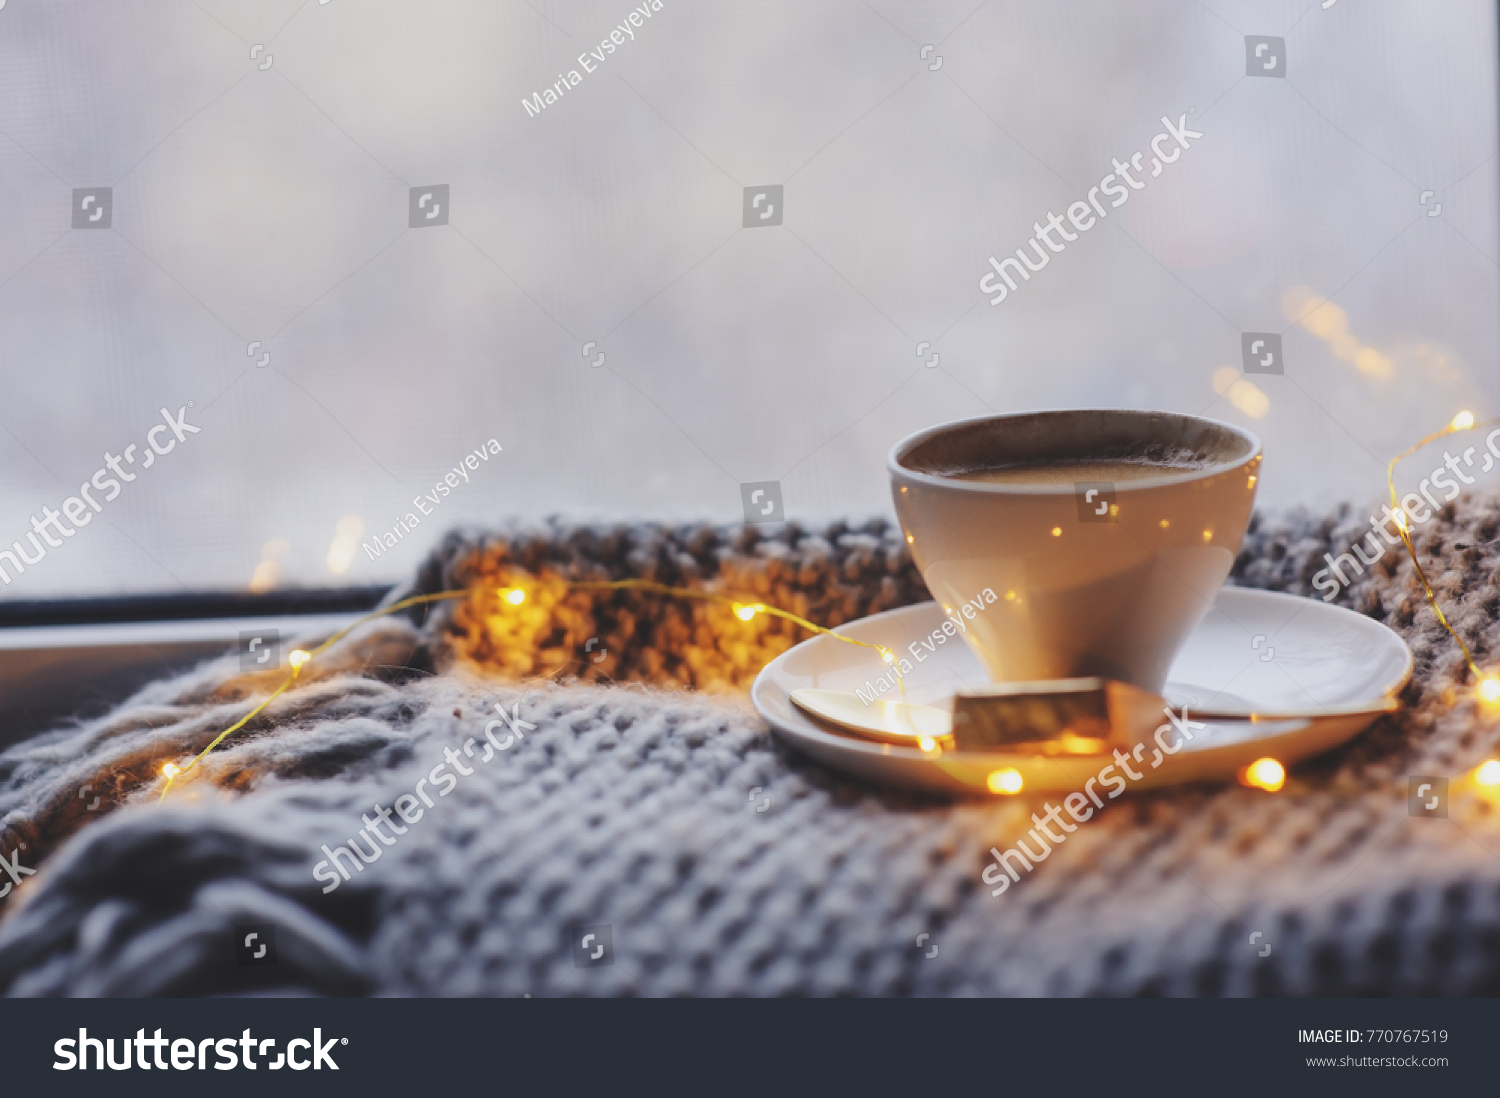 cozy winter or autumn morning at home. Hot coffee with gold metallic spoon, warm blanket, garland and candle lights, swedish hygge concept. #770767519